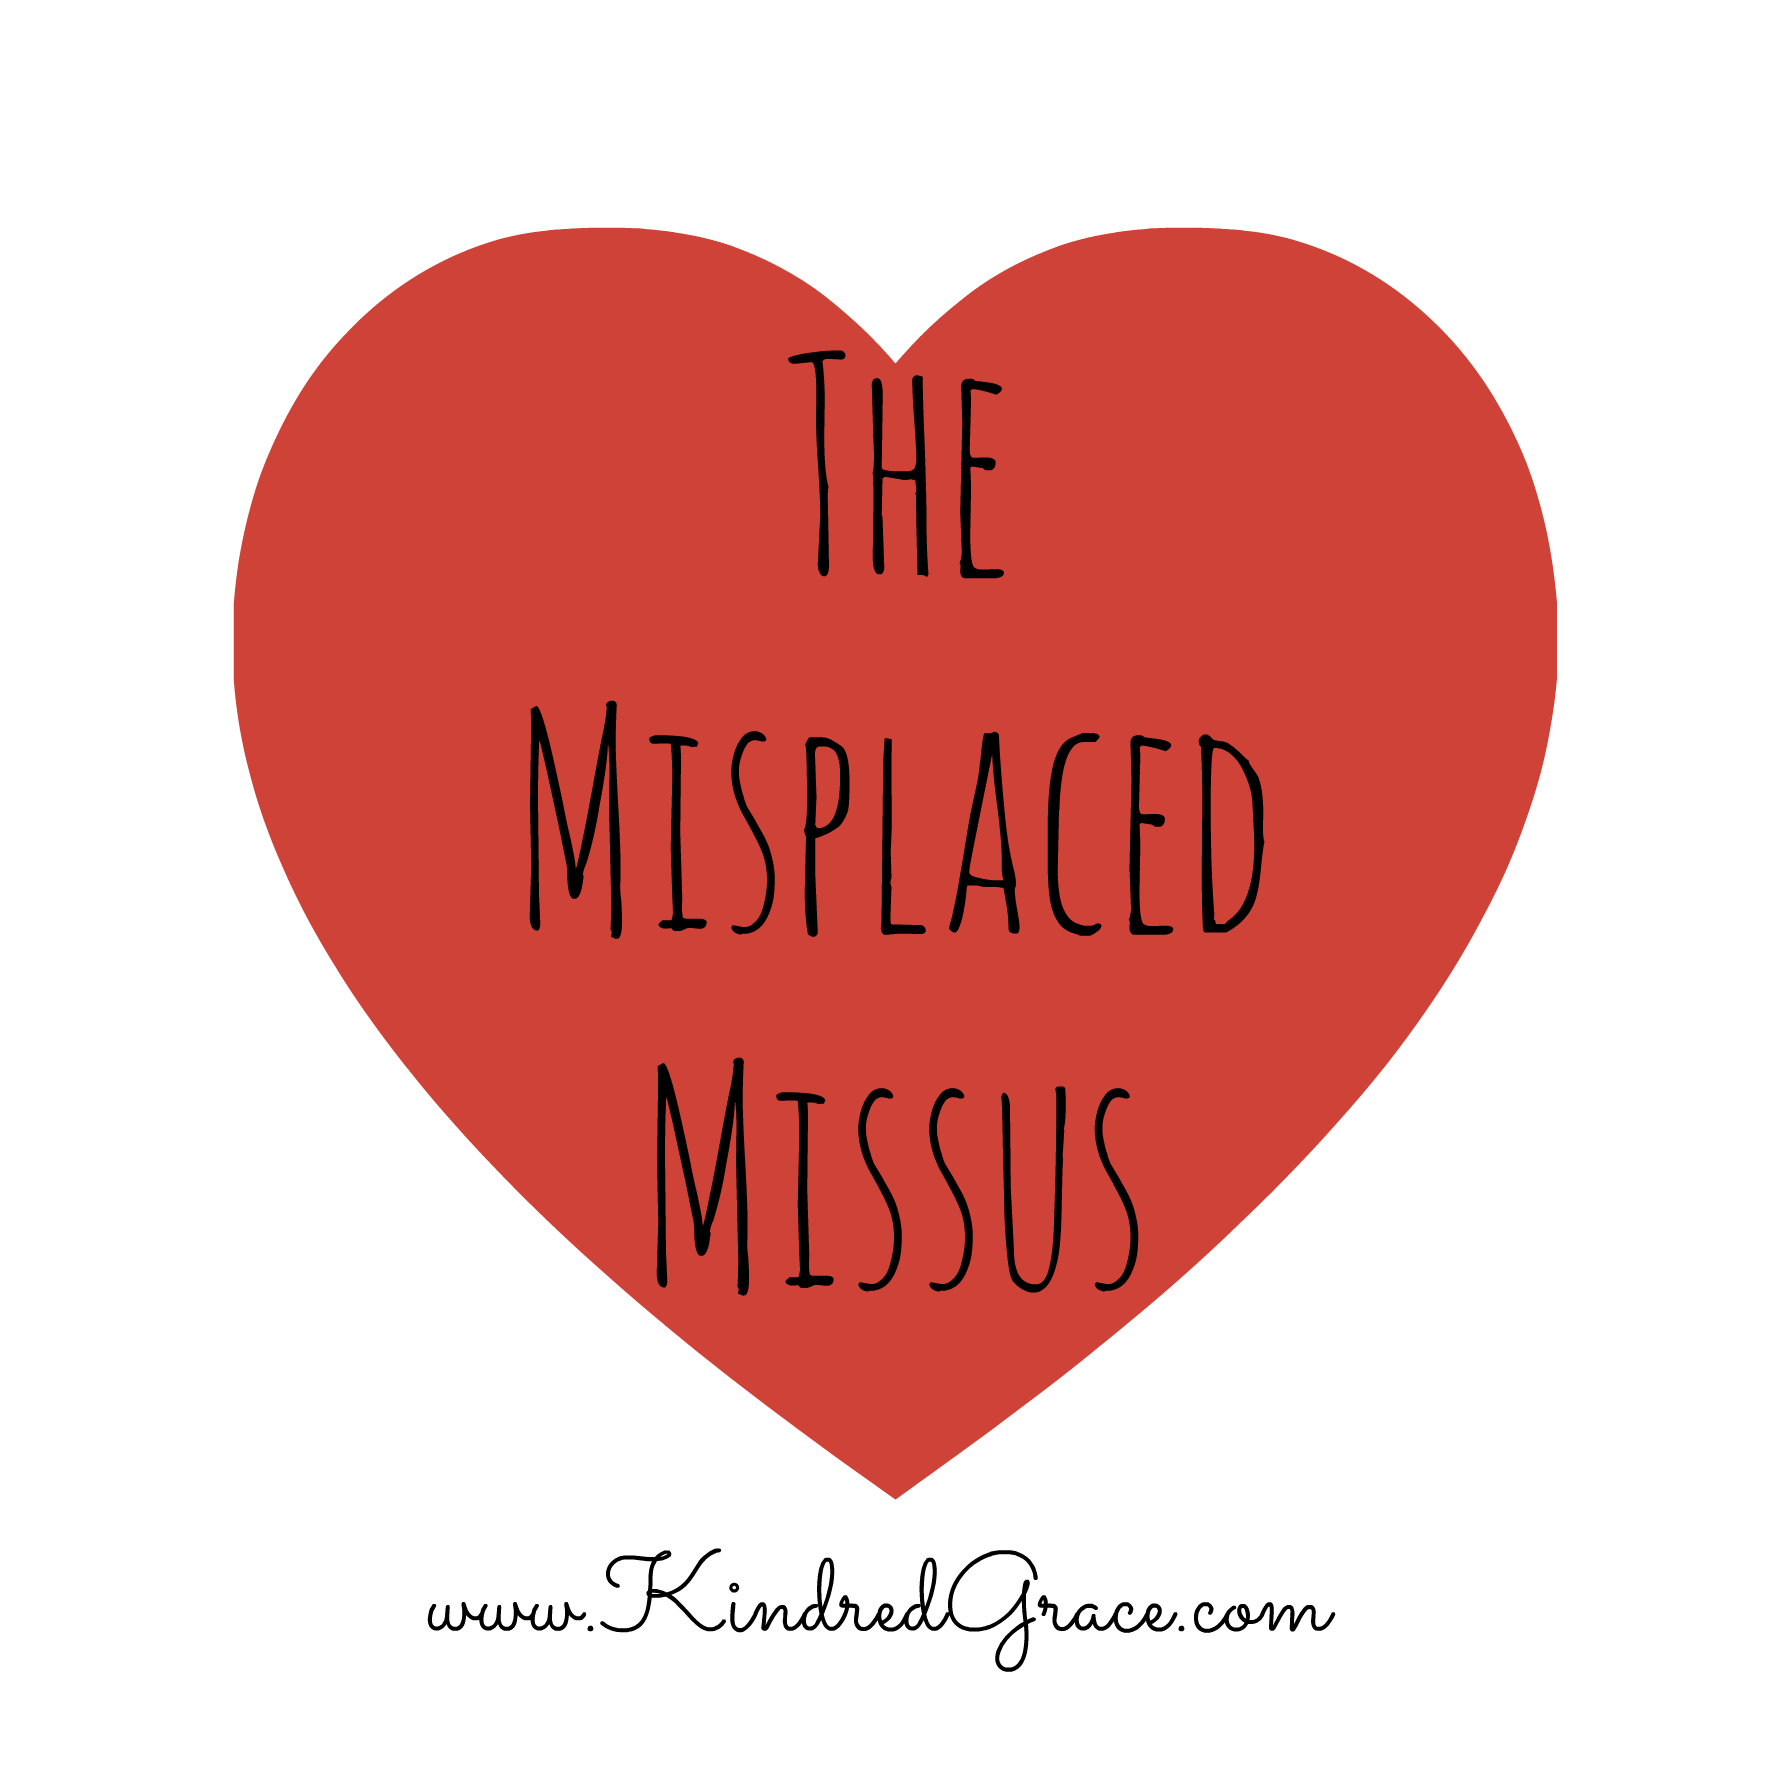 The Misplaced Missus by @RachelleRea on @KindredGrace